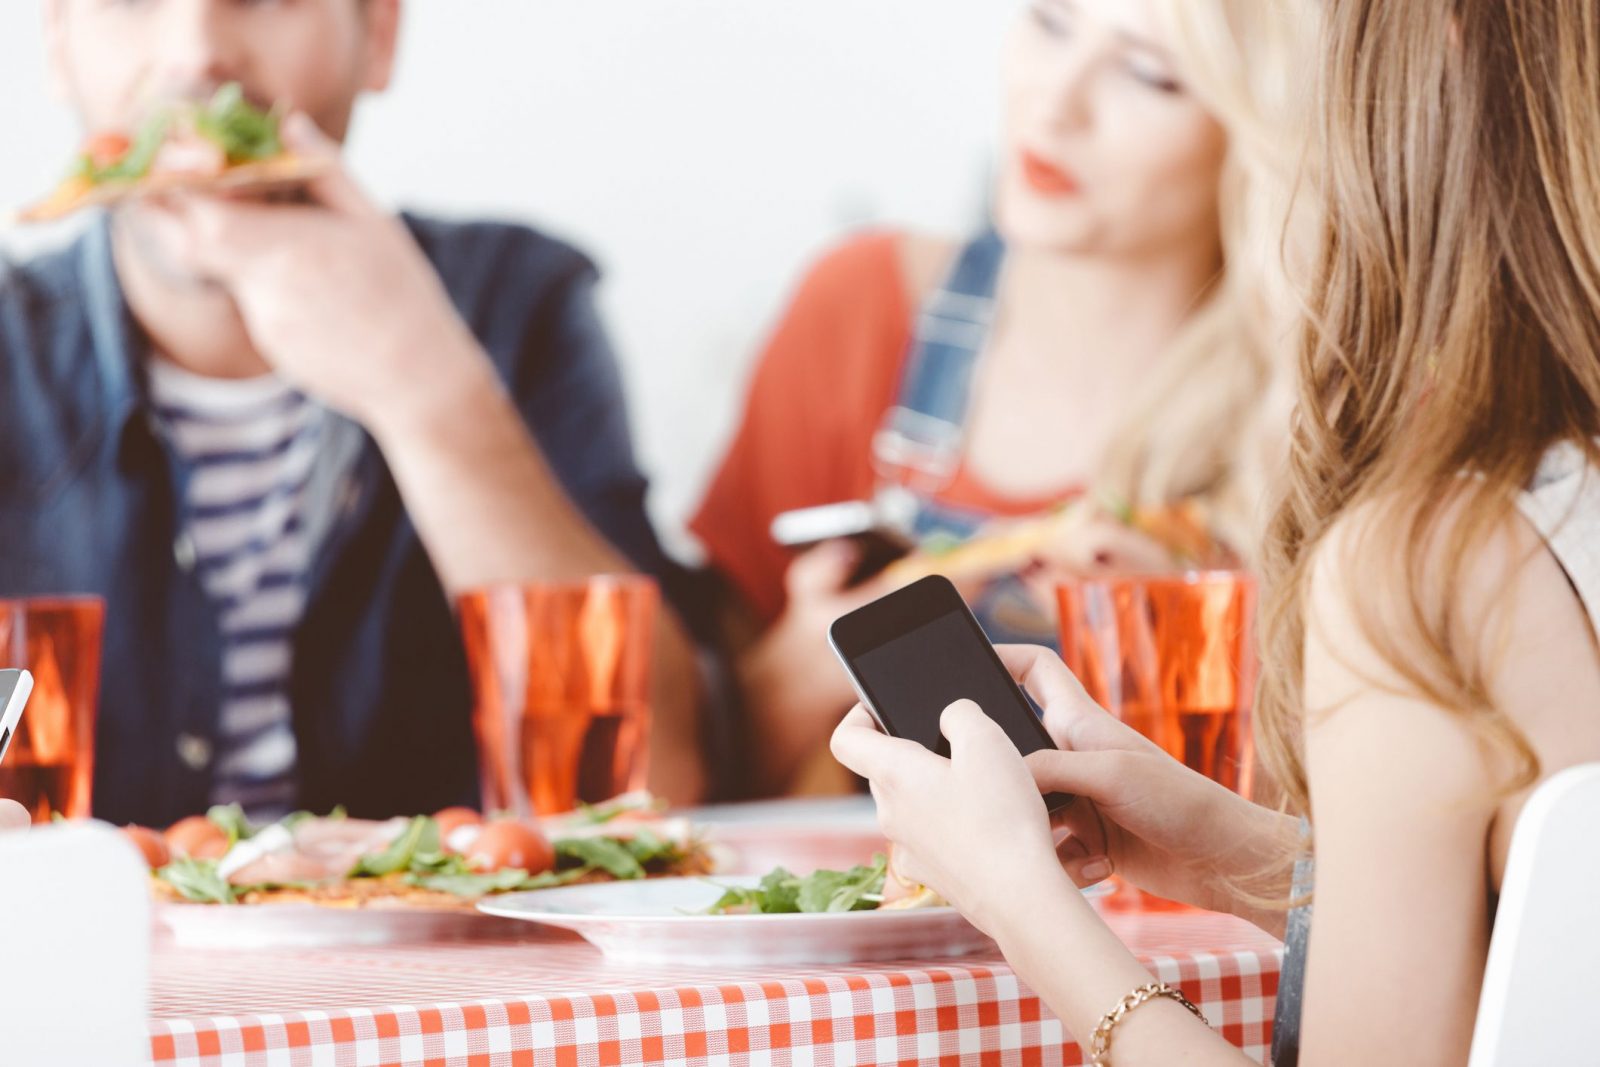 📱 Reply to These Texts and We’ll Reveal How Easily Annoyed You Are Friends Using Phone At Meal